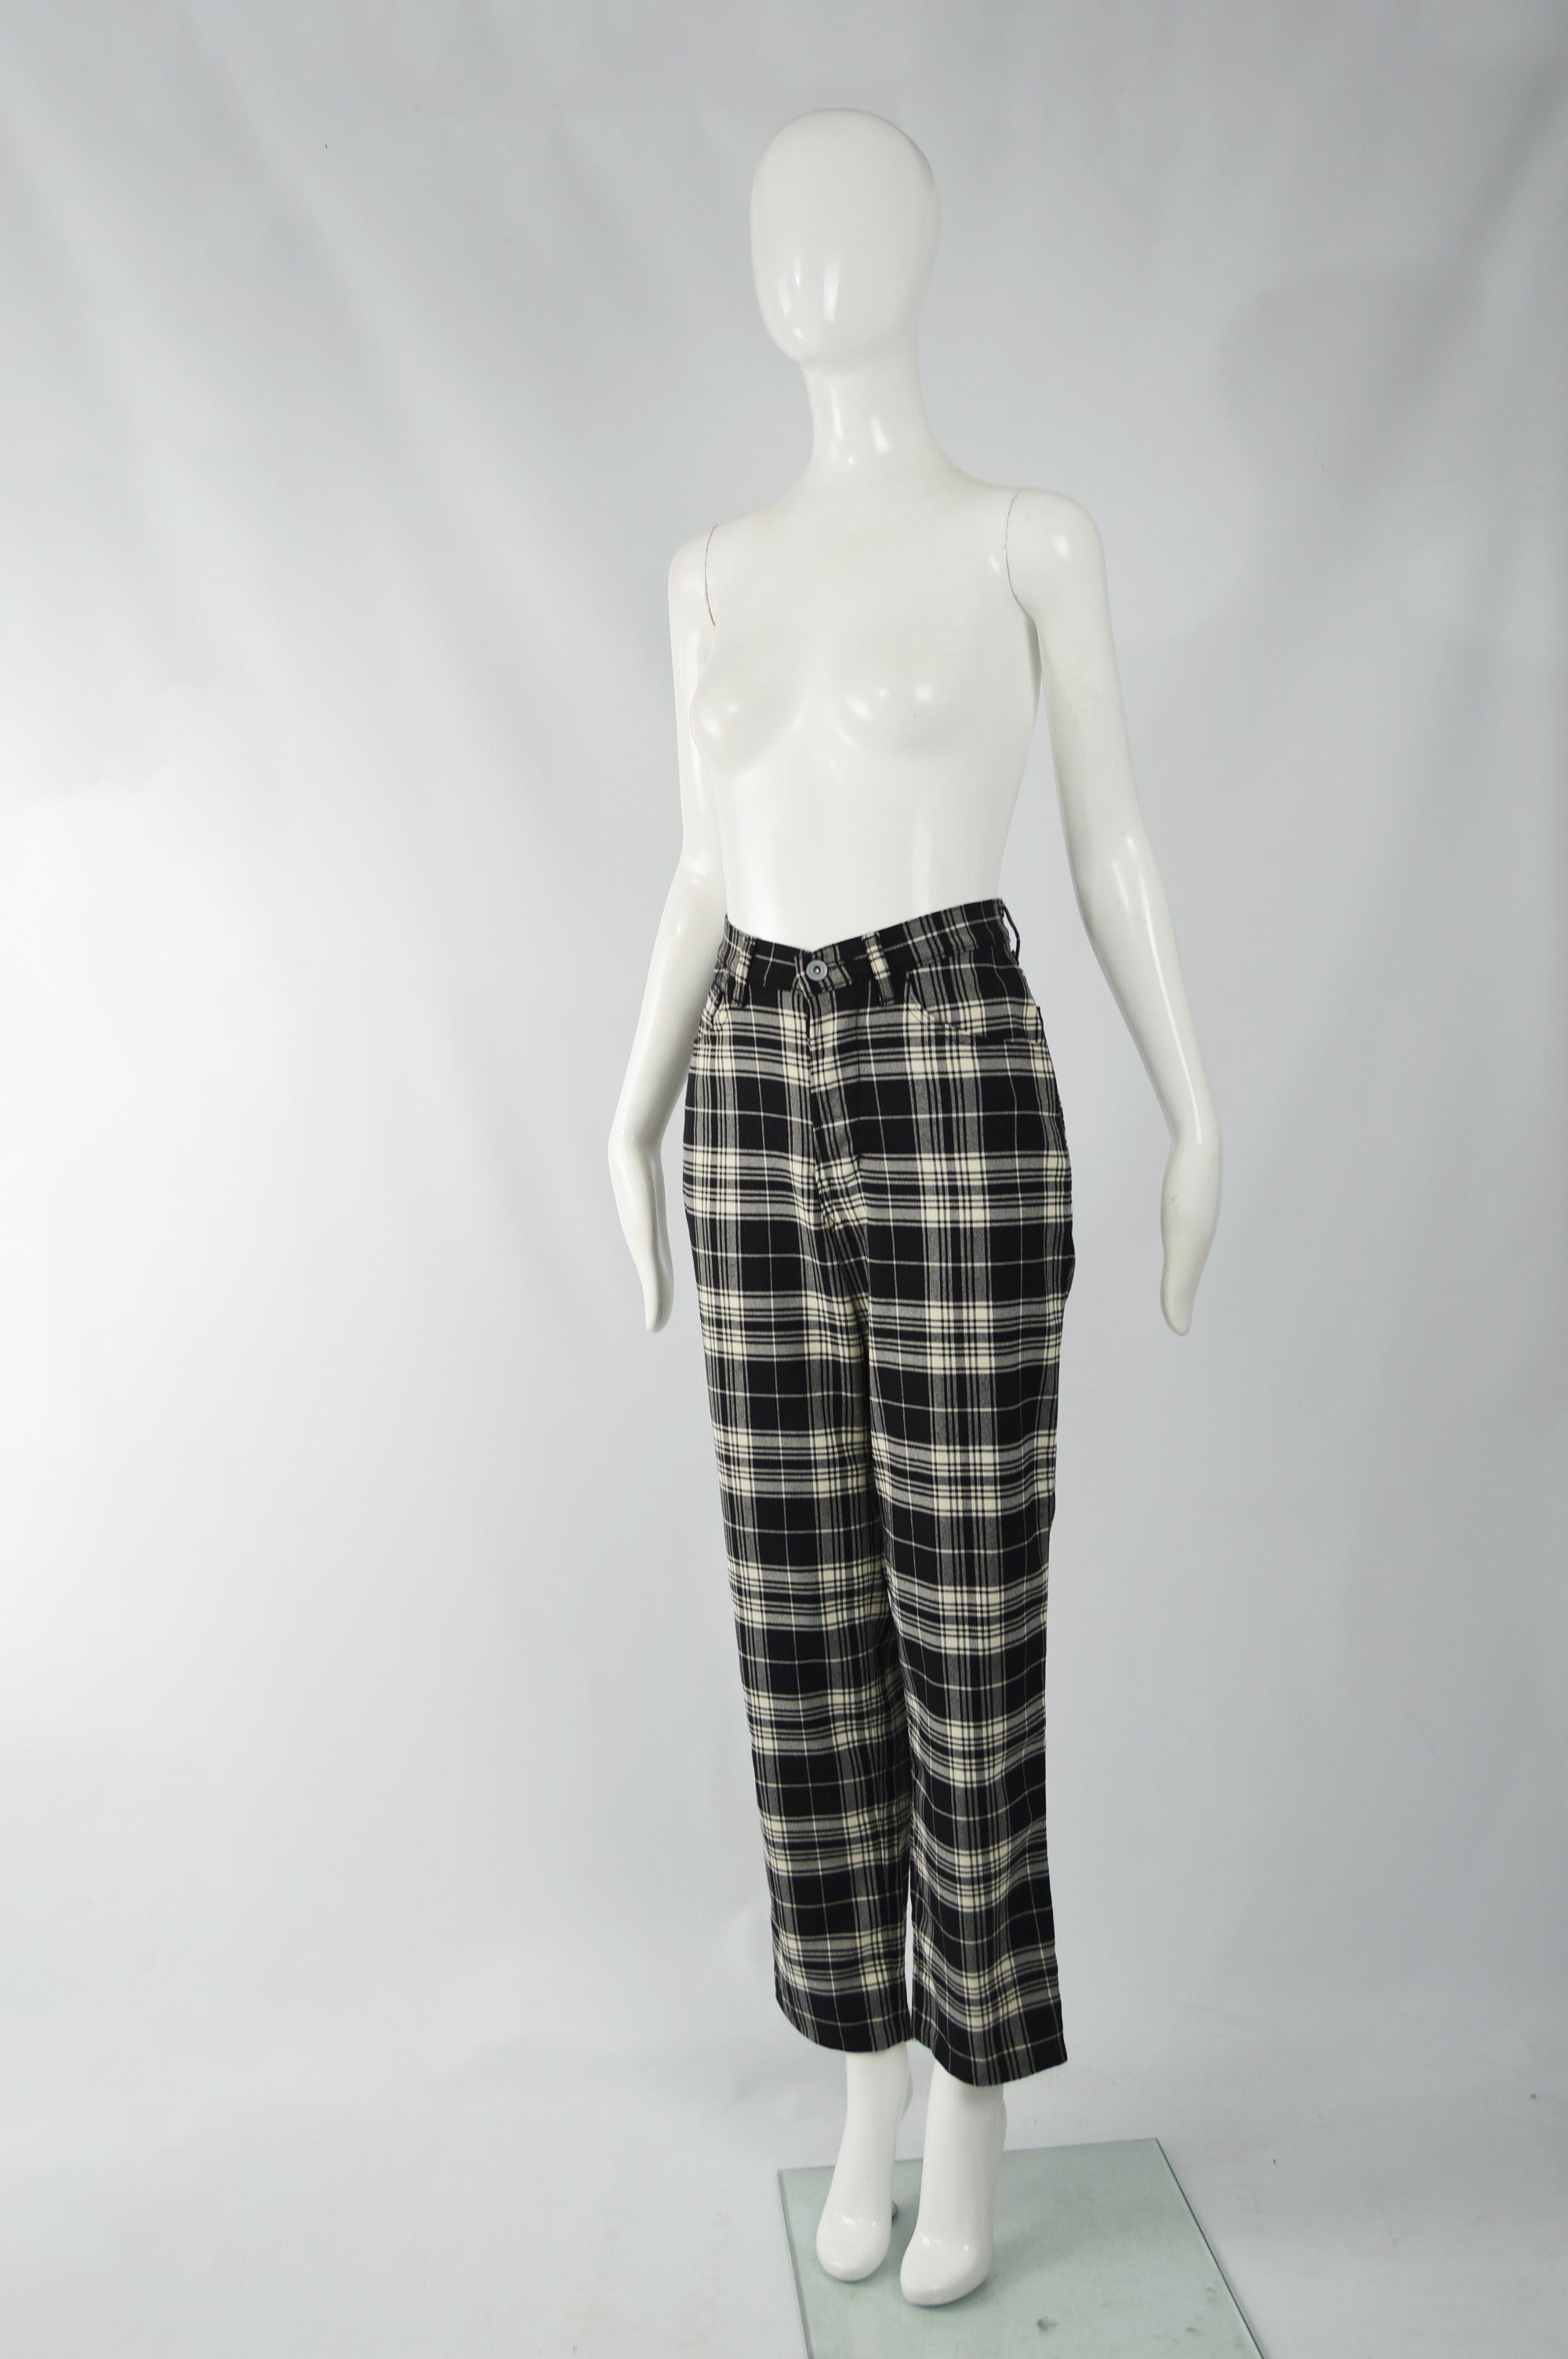 Joseph Vintage Black & White Check Trousers Pants In Excellent Condition For Sale In Doncaster, South Yorkshire